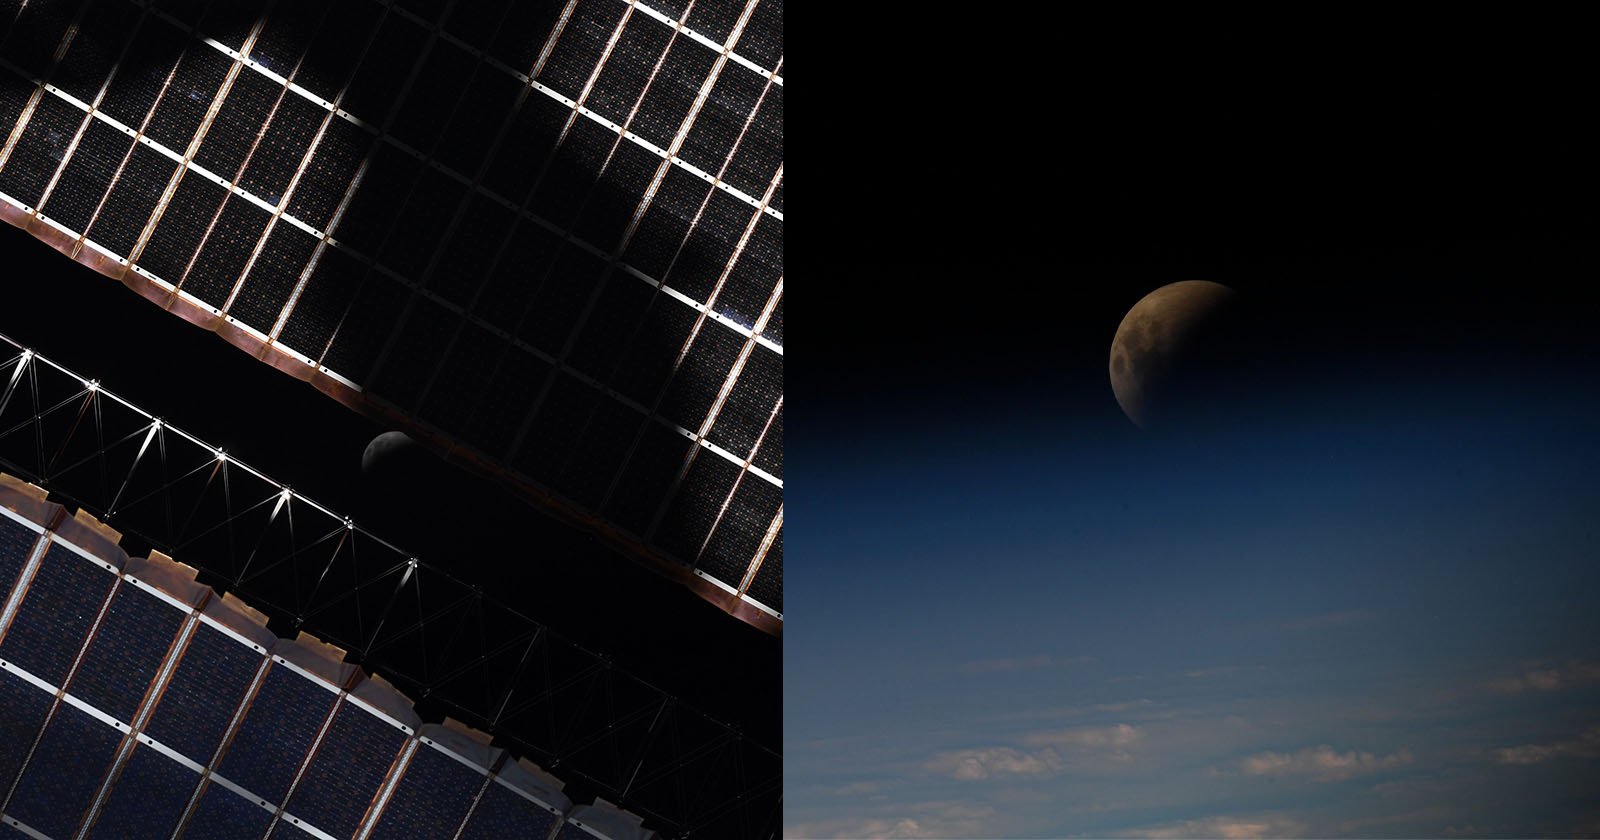 Astronaut Captures Lunar Eclipse from the International Space Station